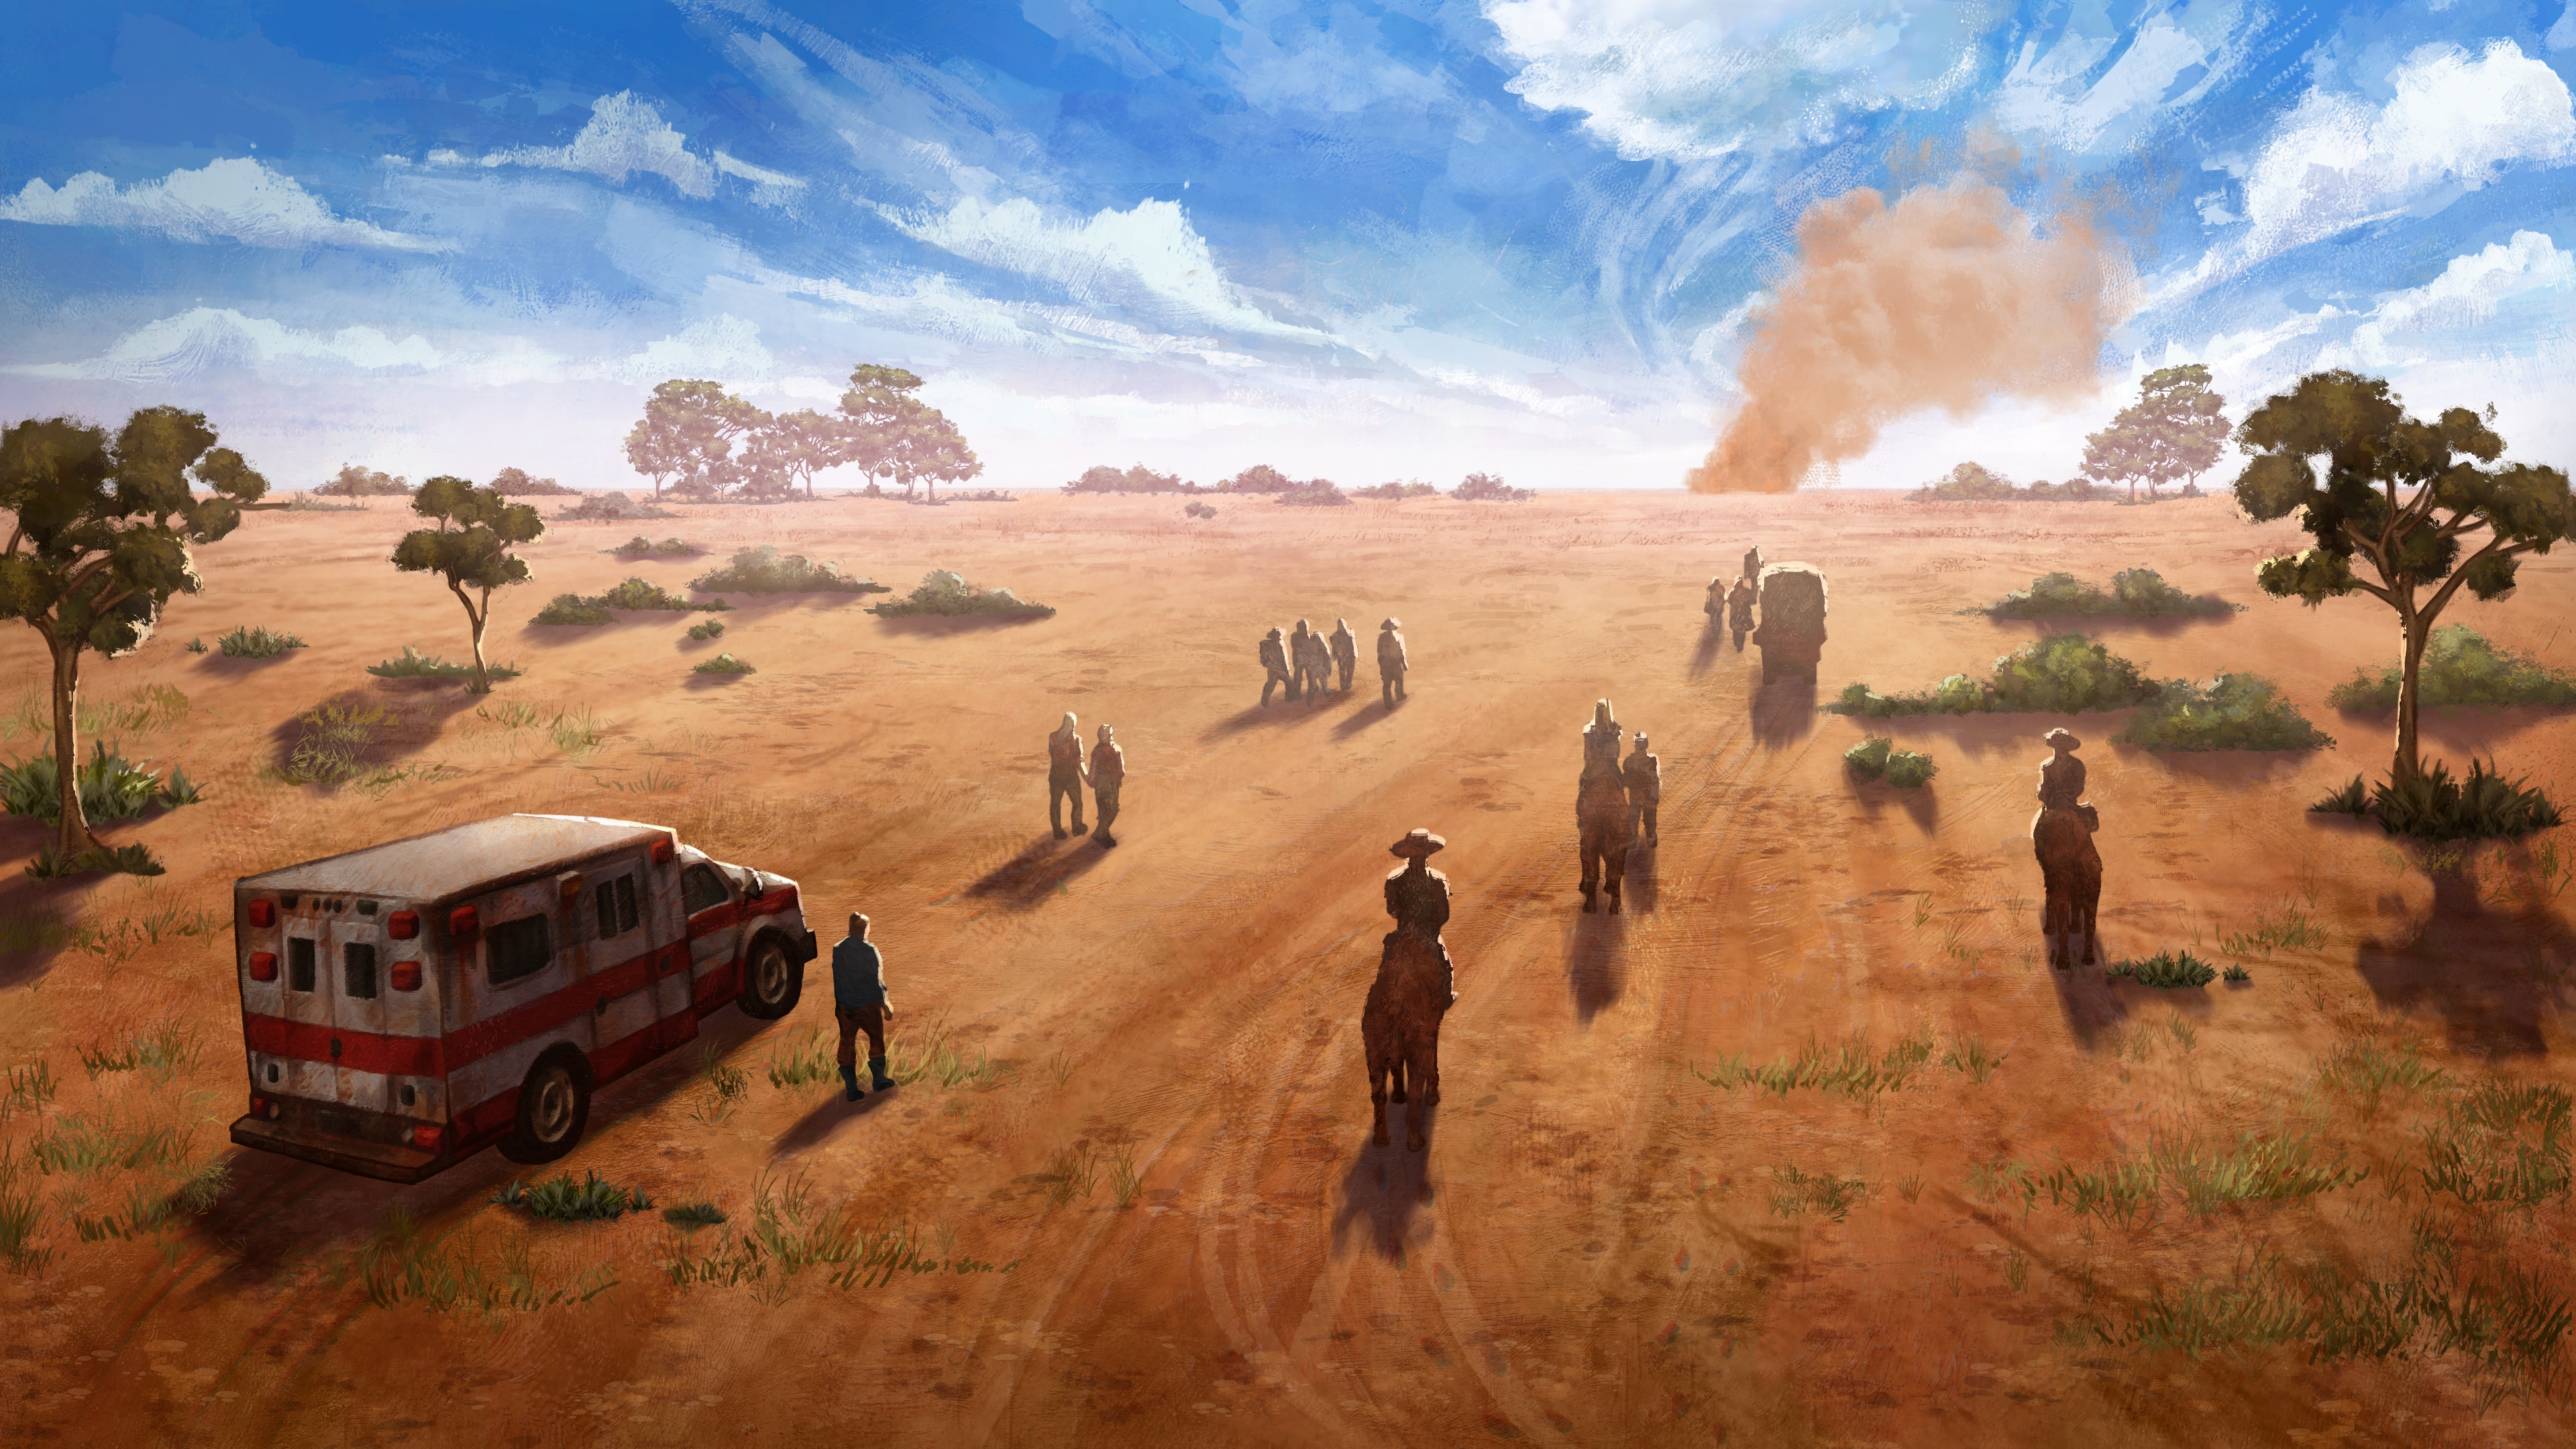 A group of travelers approach a distant smoke cloud